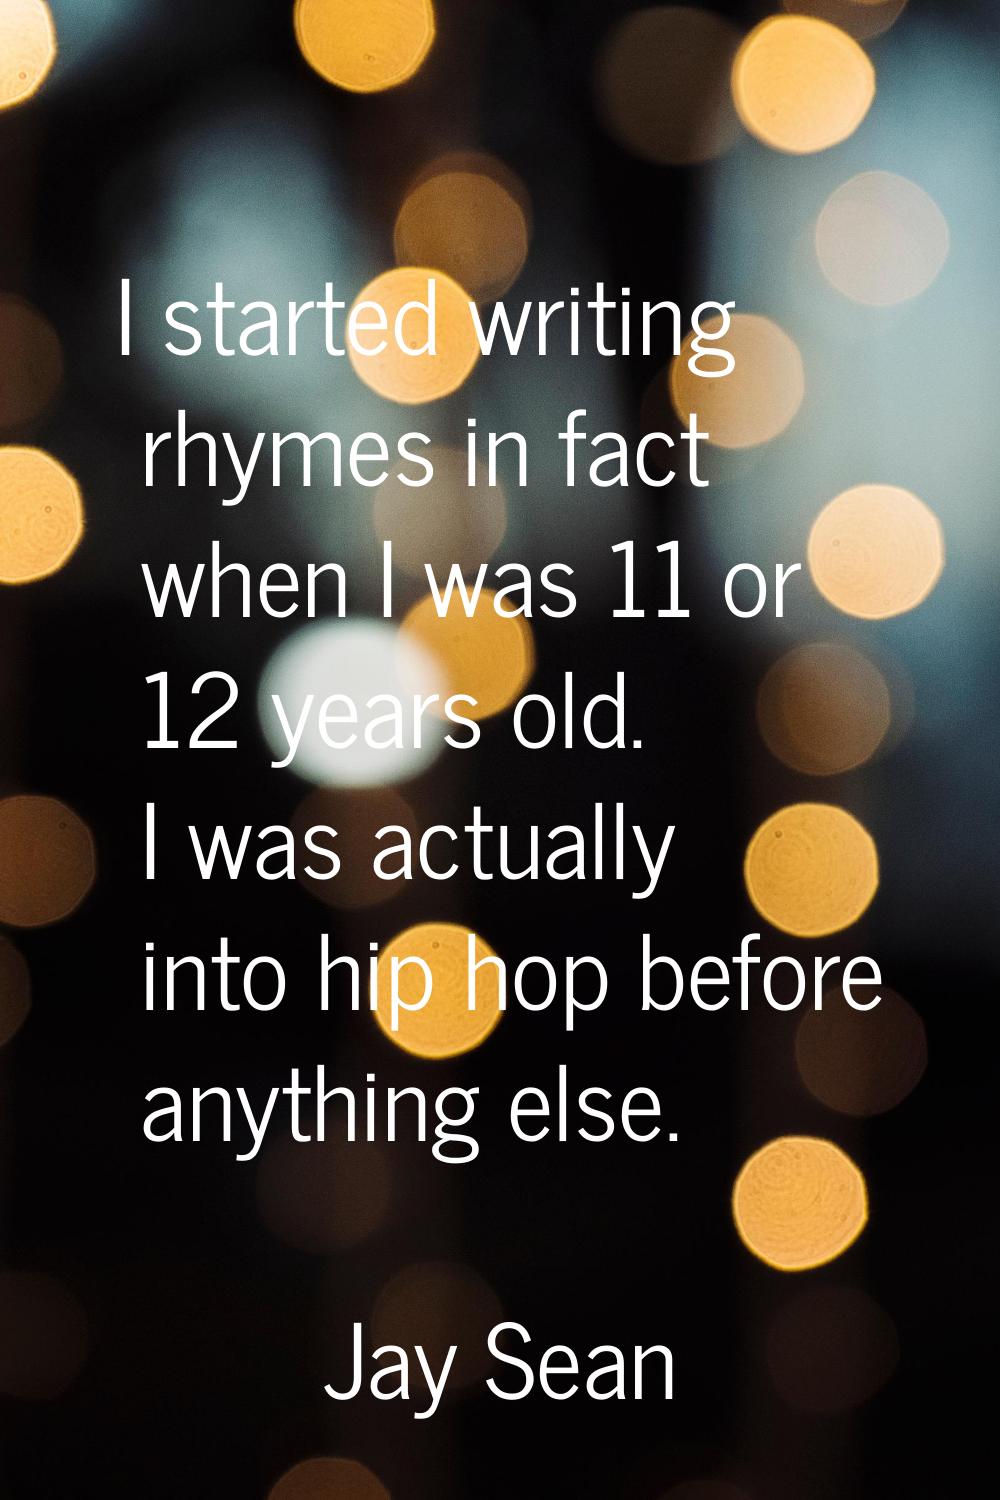 I started writing rhymes in fact when I was 11 or 12 years old. I was actually into hip hop before 